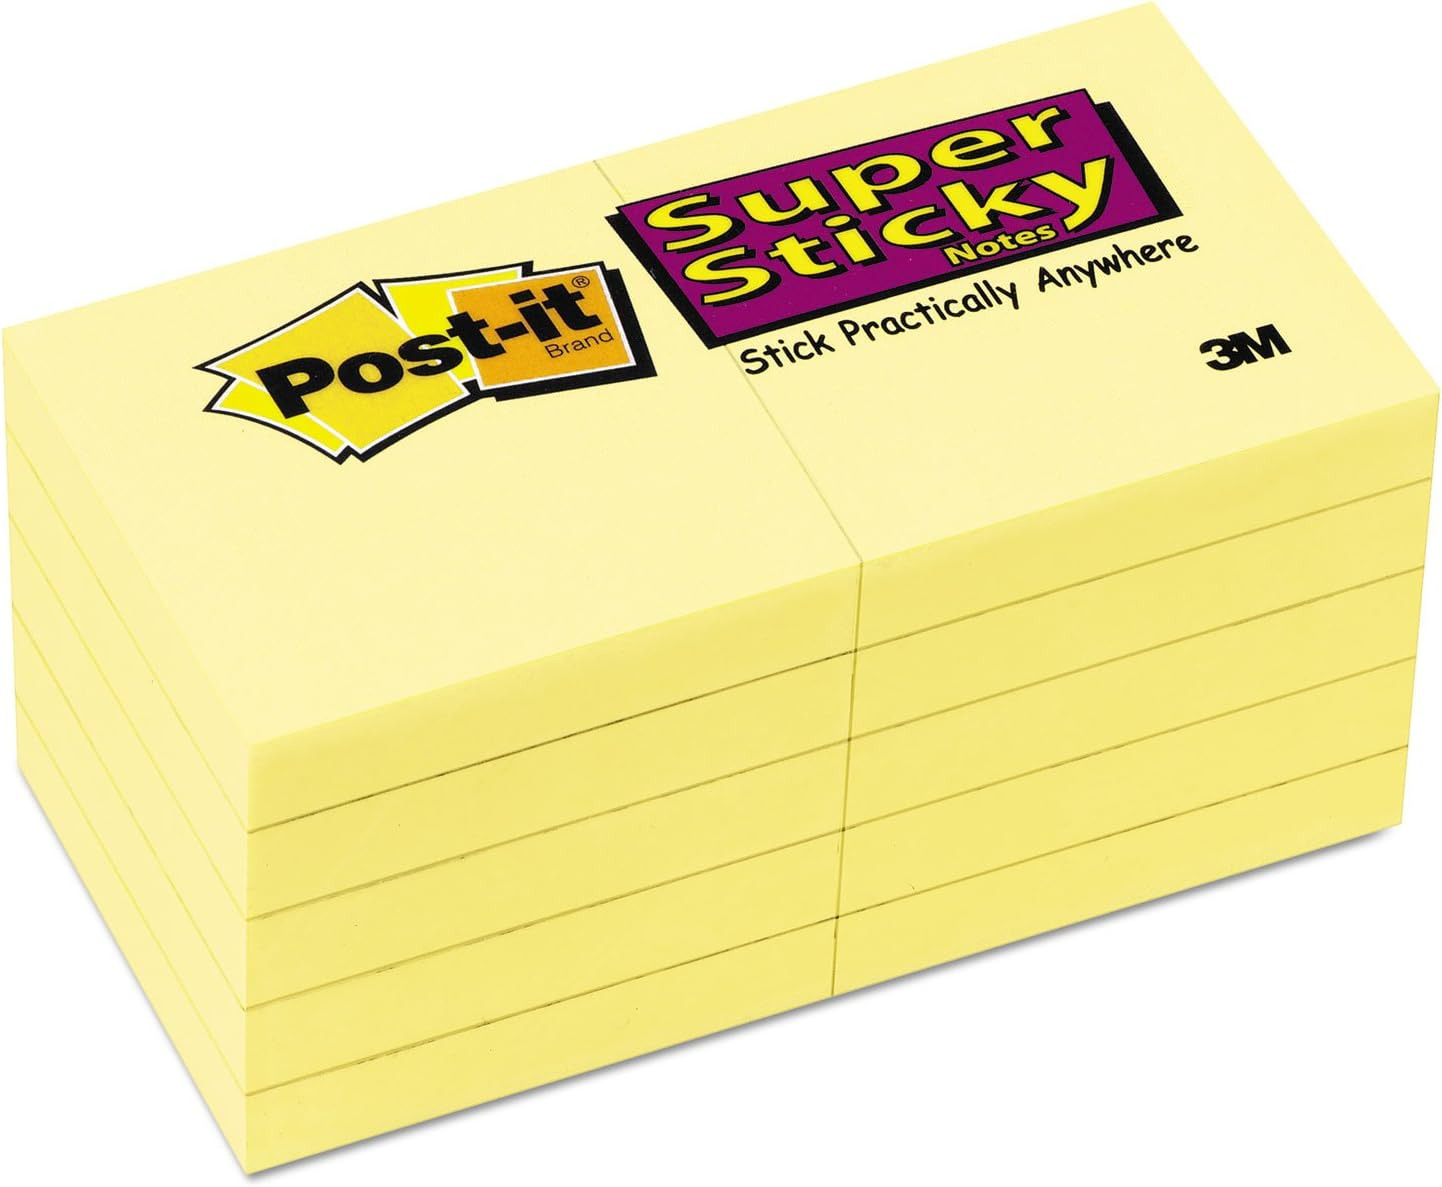 Post-It Super Sticky Notes, 2X2 In, 10 Pads, 2X the Sticking Power, Canary Yello